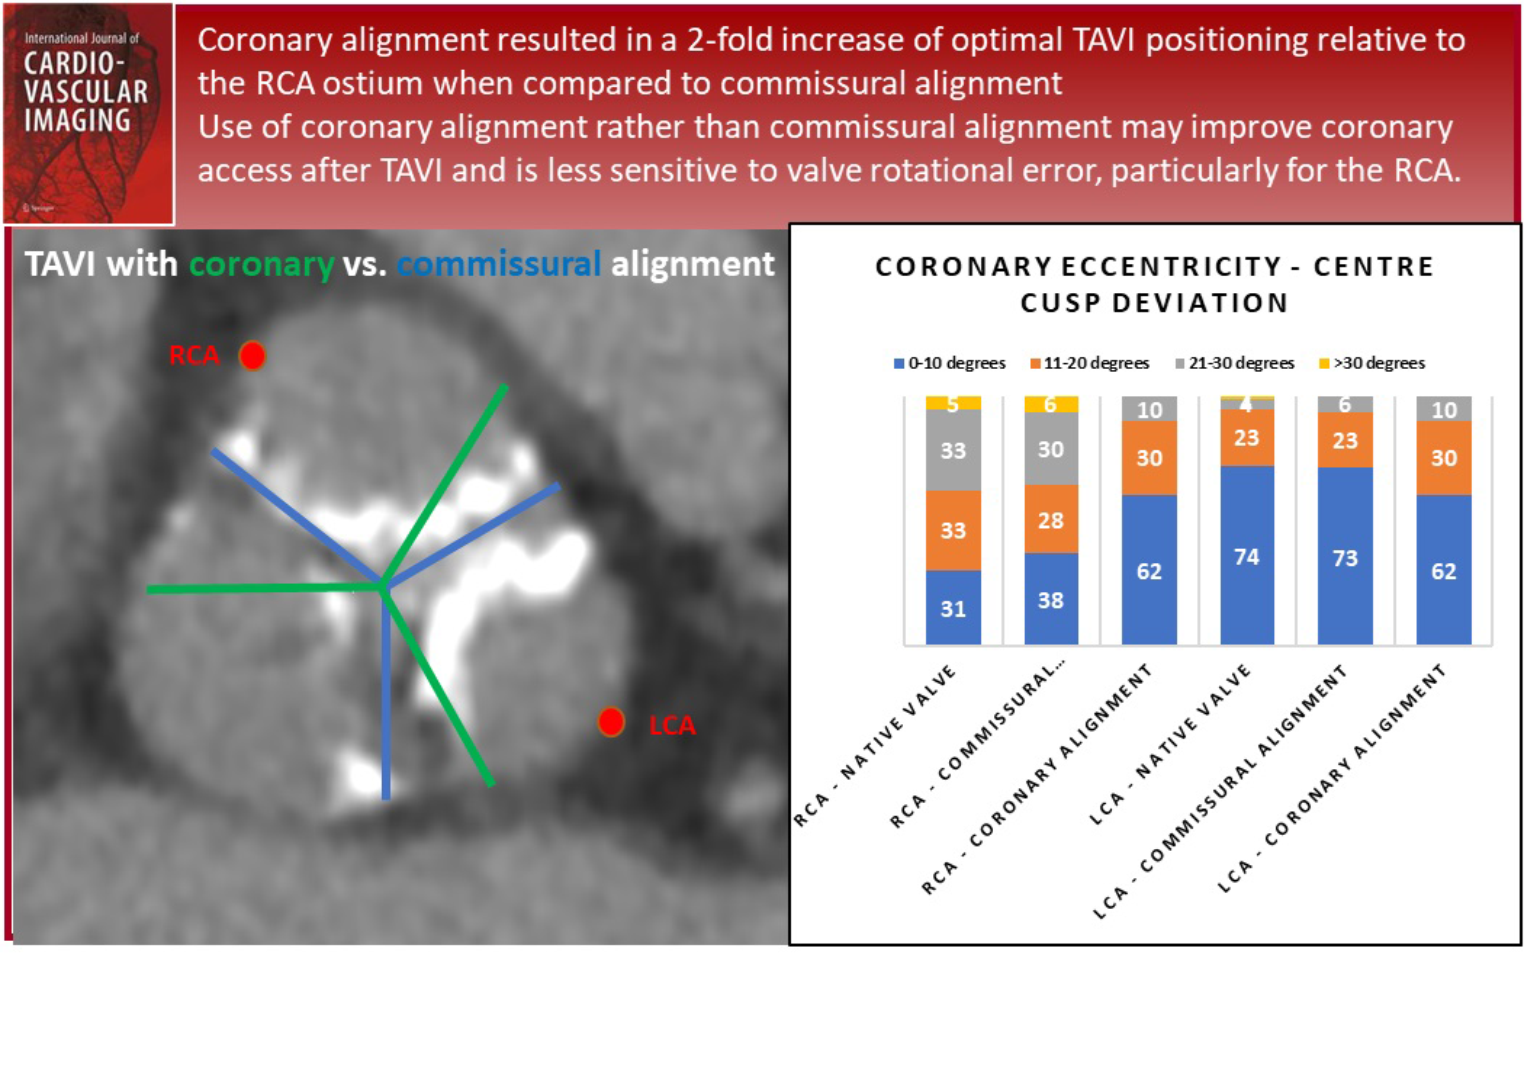 Impact of commissural versus coronary alignment on risk of coronary obstruction following transcatheter aortic valve implantation